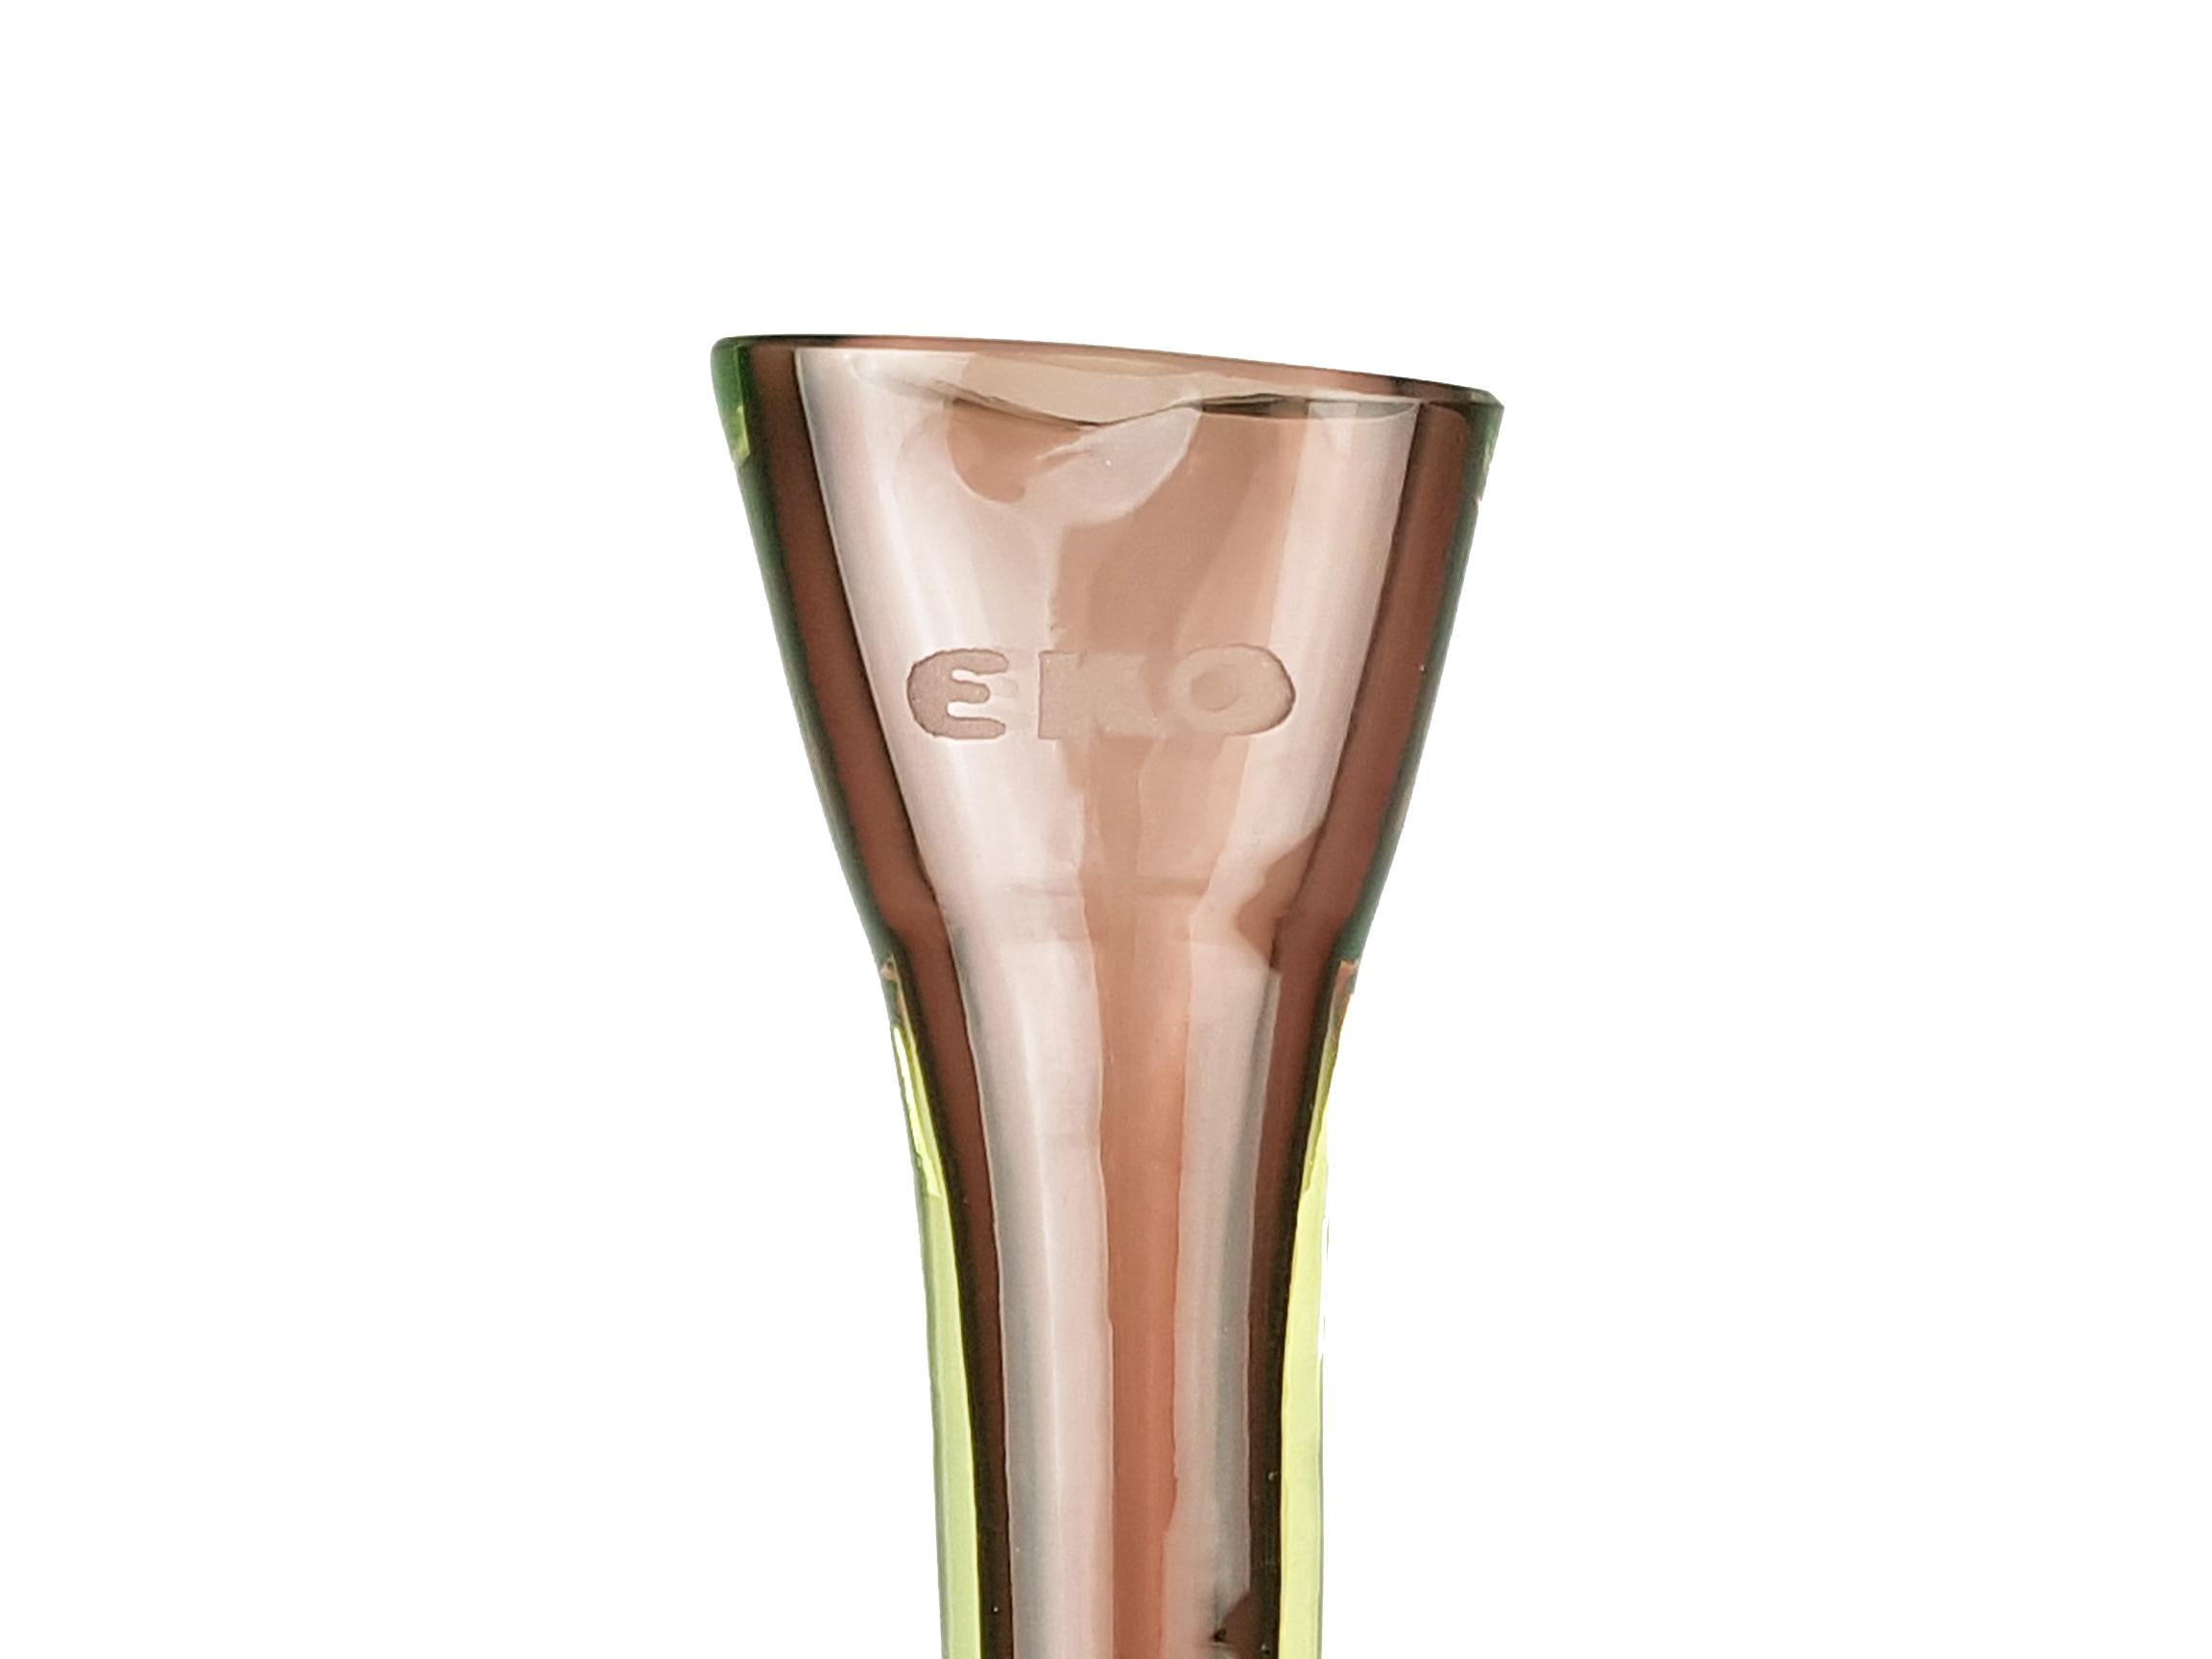 Multicolored Sommerso Glass 1960s Vase by Flavio Poli for Seguso/Eko In Good Condition For Sale In Varese, Lombardia